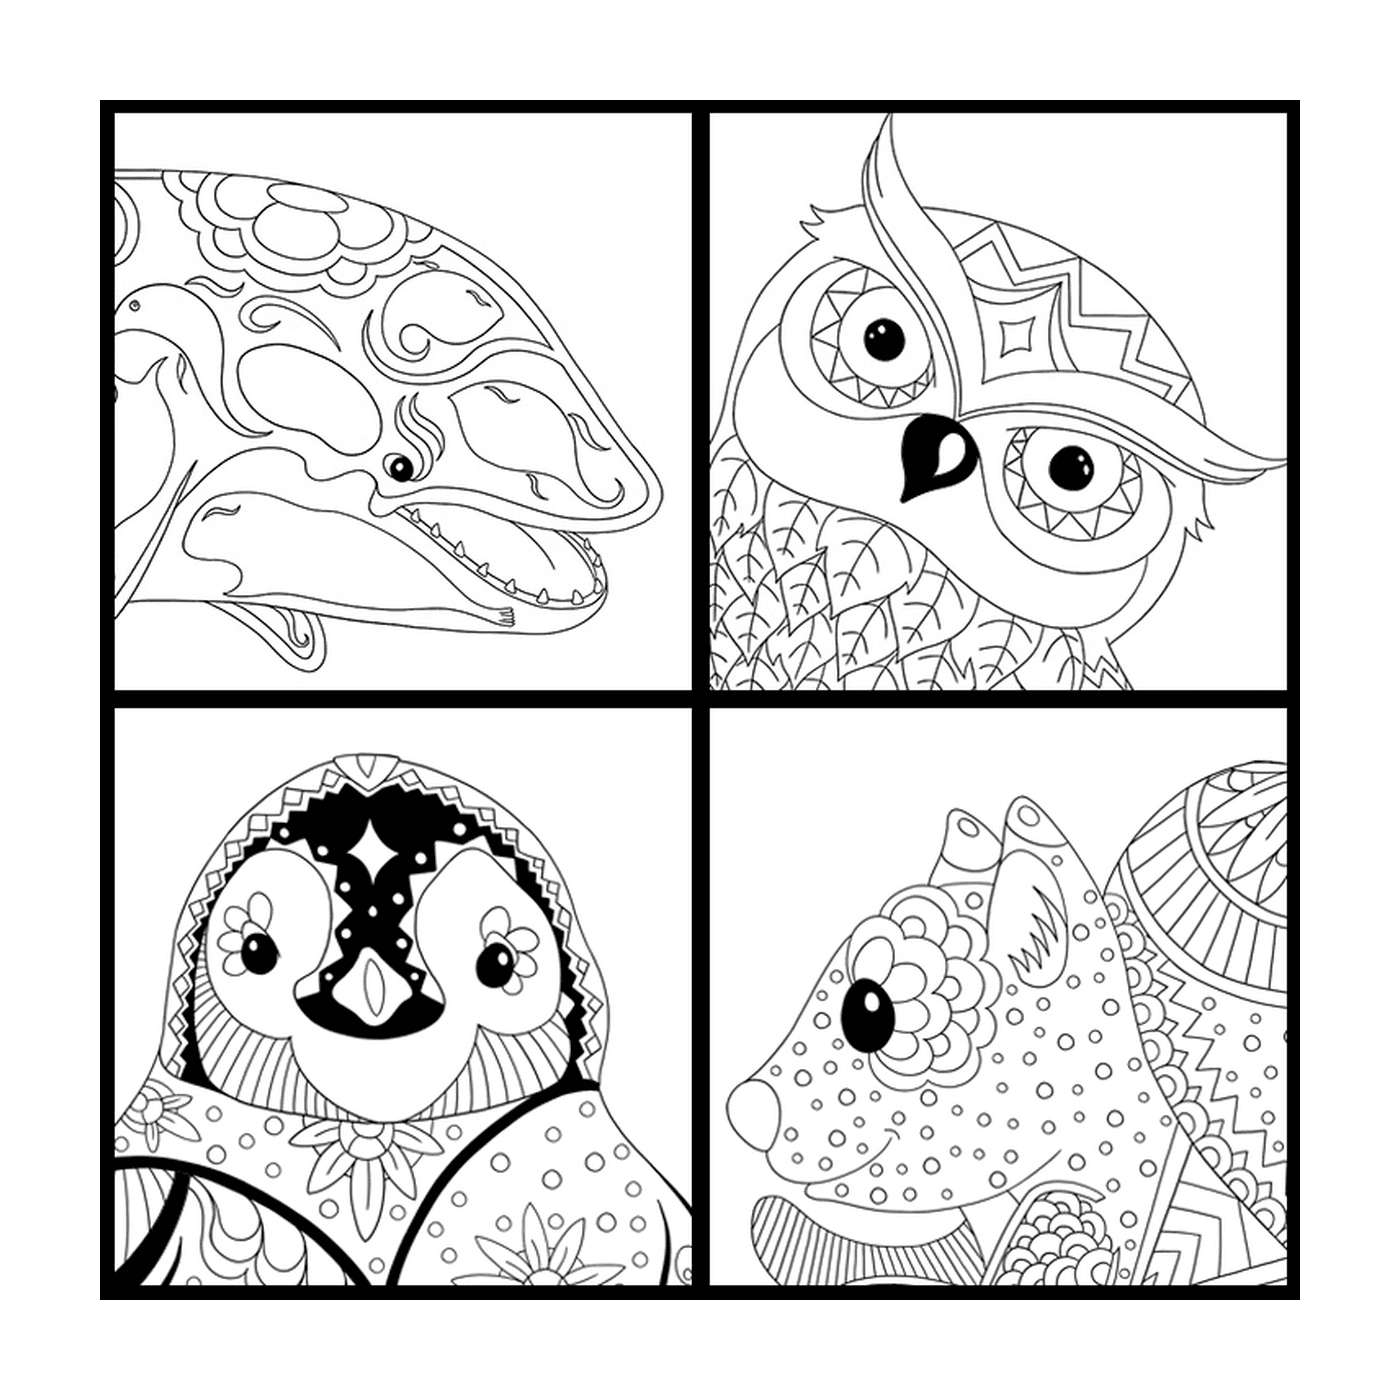  Various animals to color soon by Dinett 